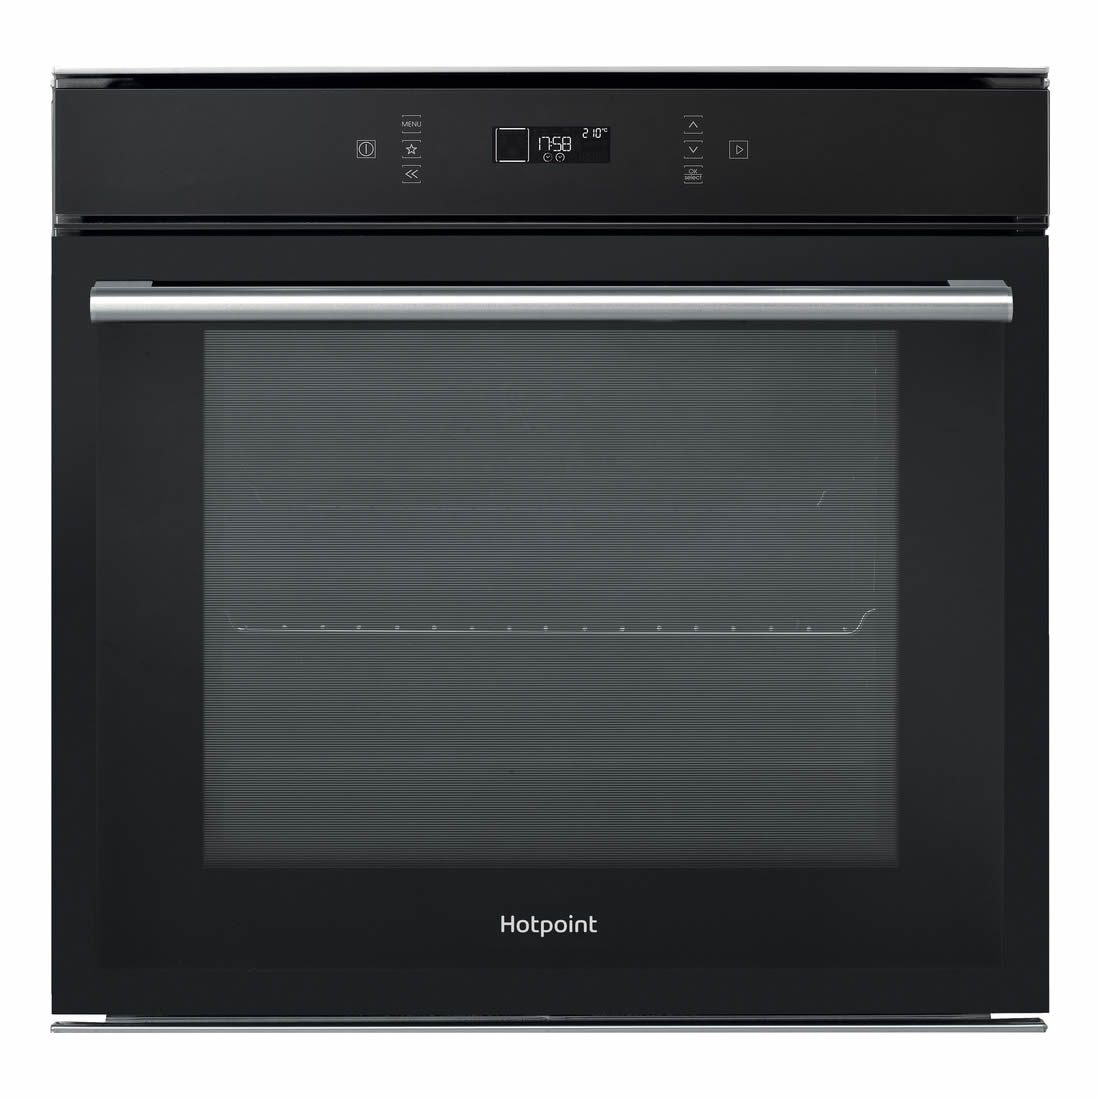 Hotpoint Built-In Single Electric Oven Self Cleaning Black